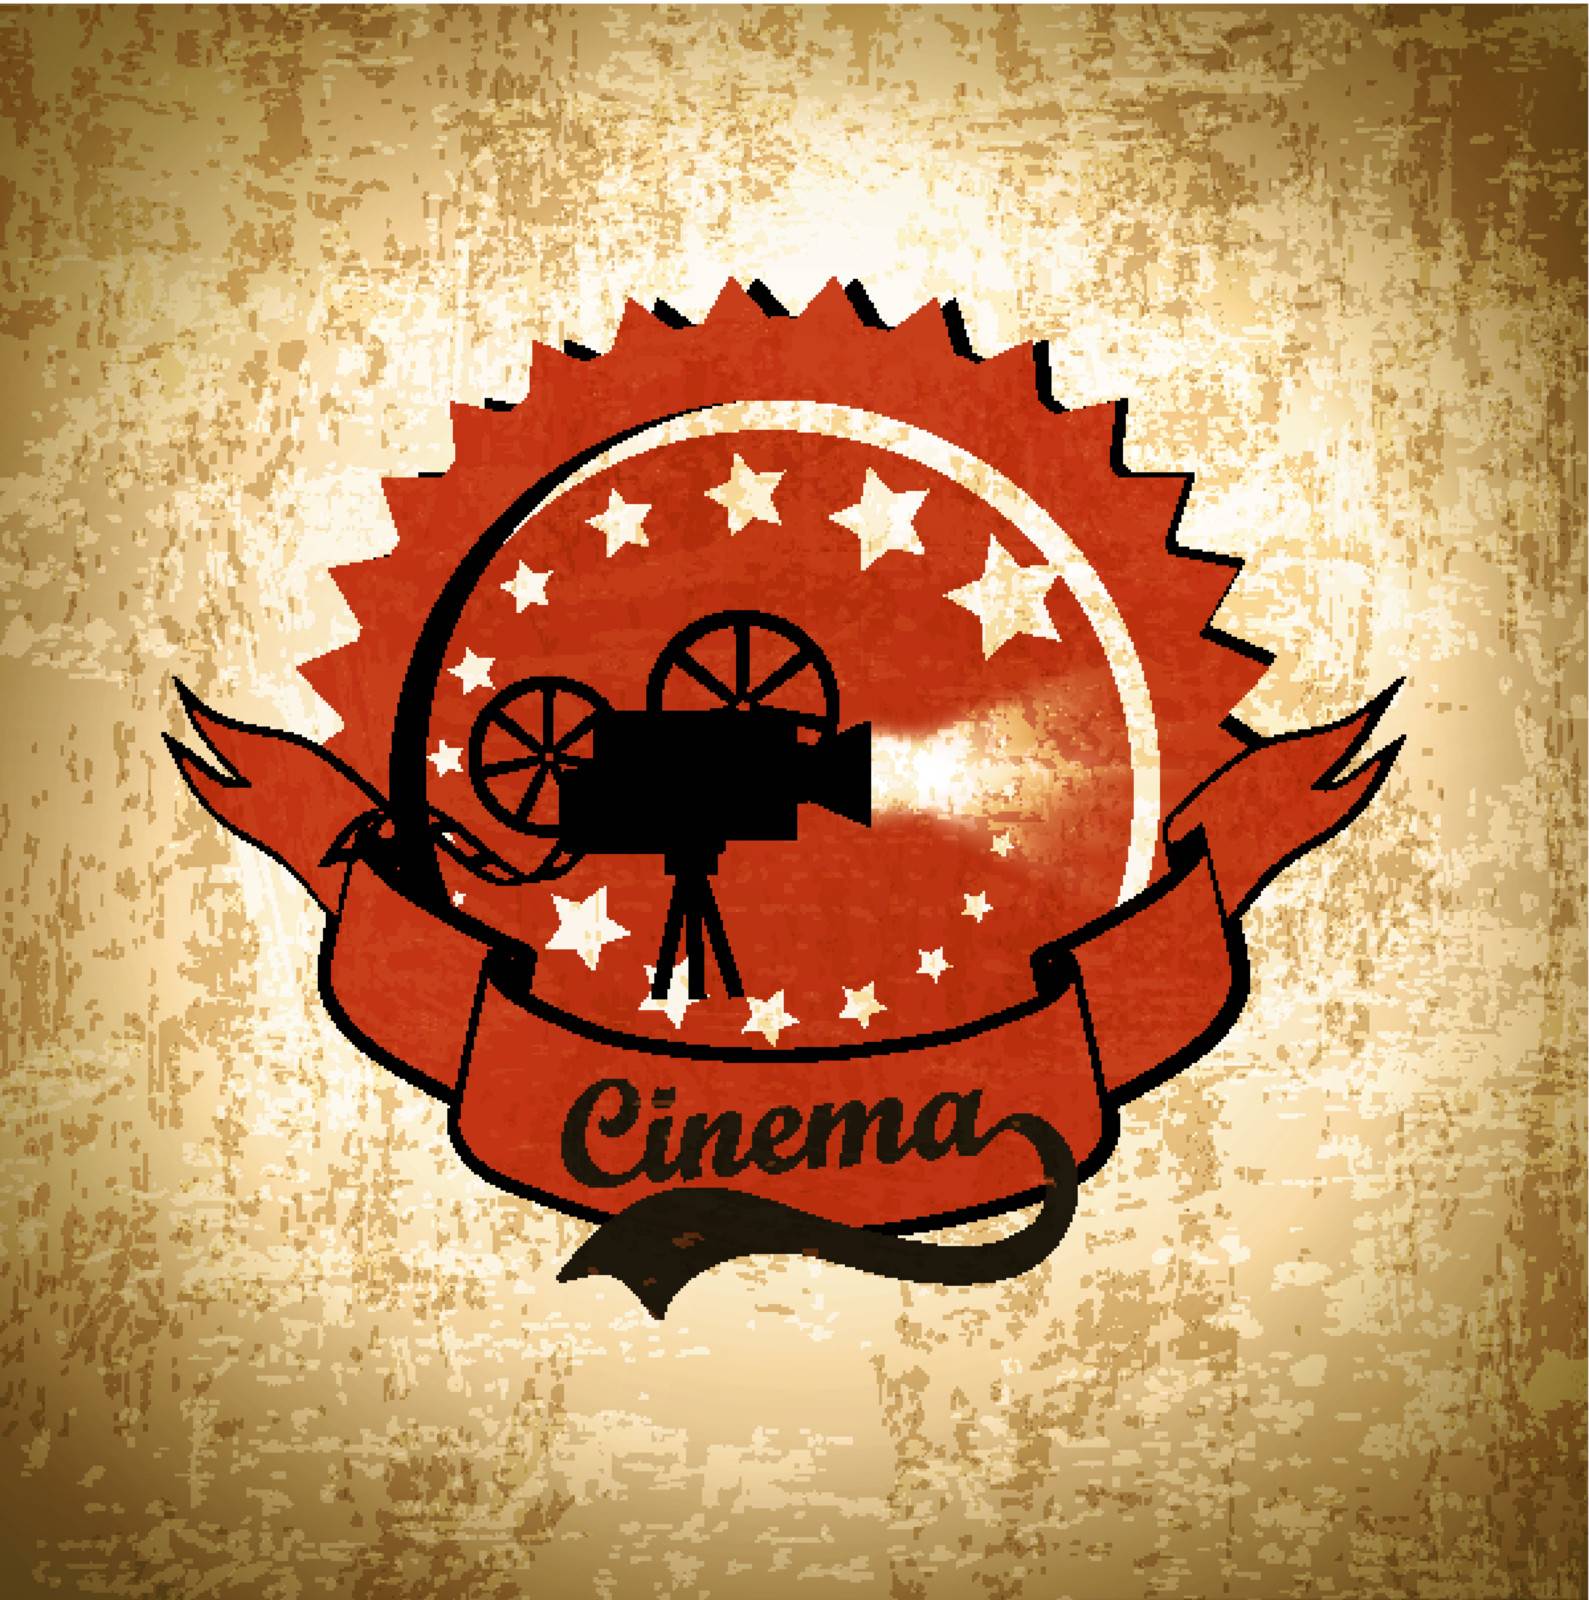 Retro Cinema Background With Old Movie Camera Label In Black and Red